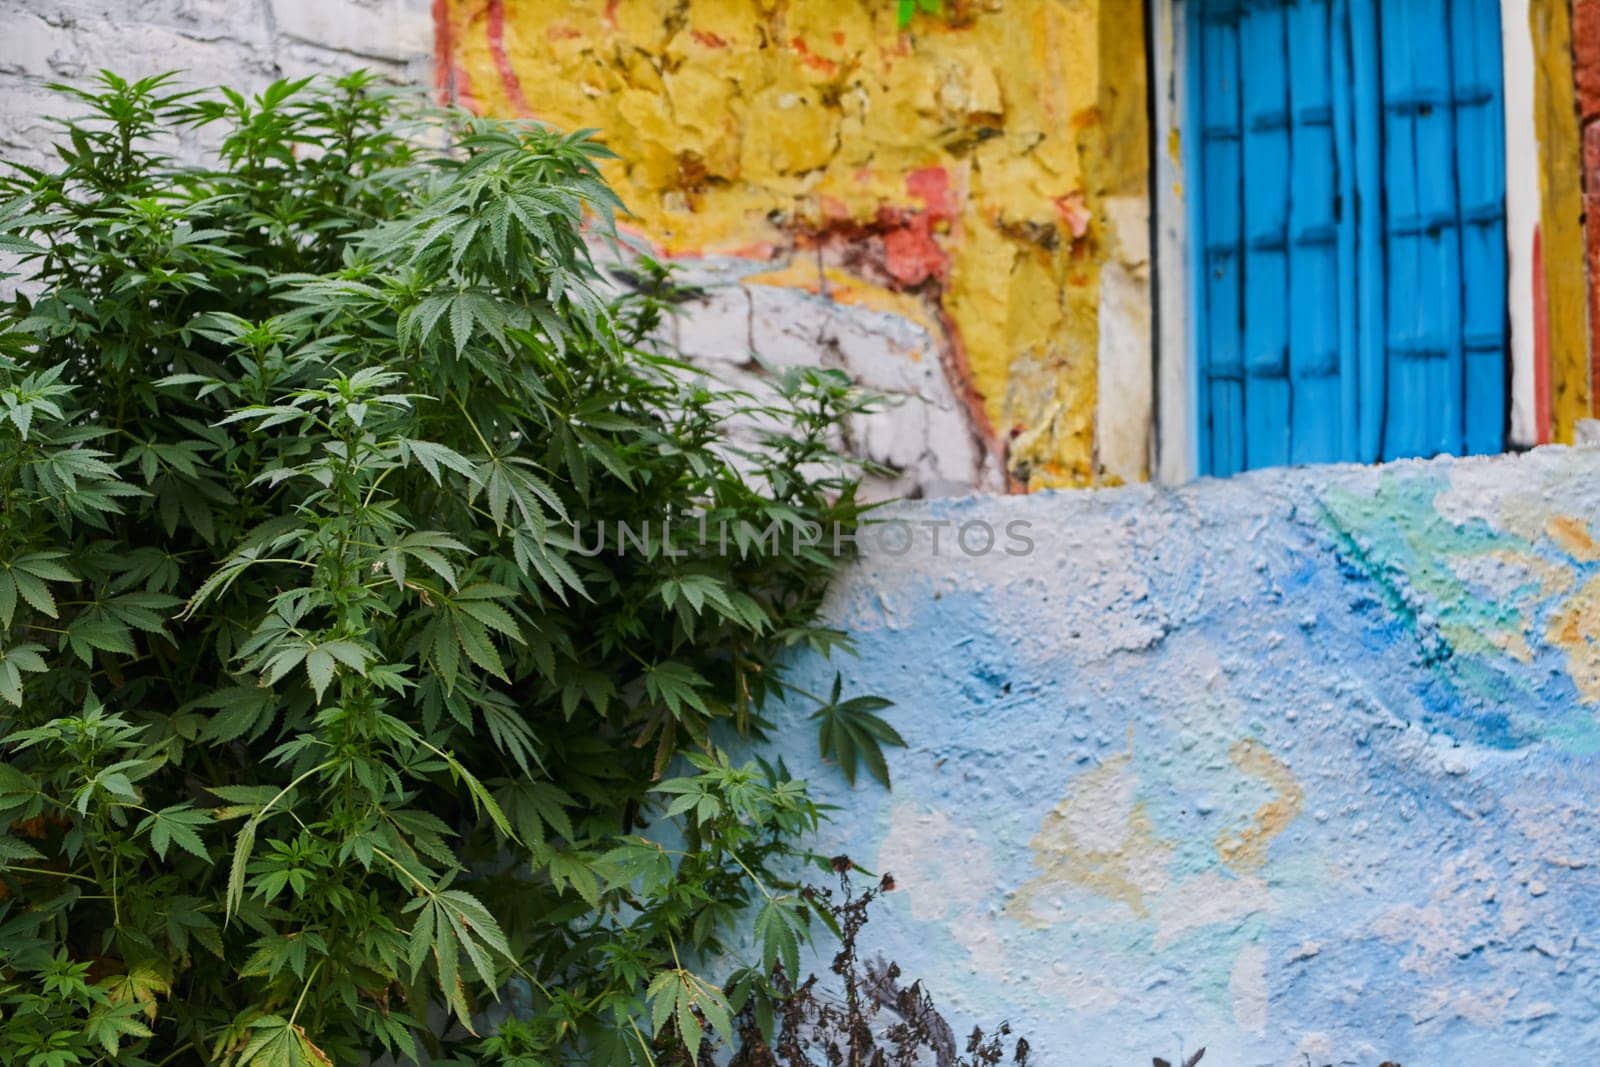 A close-up photo of fresh marijuana leaves in an urban setting, showcasing the vibrant green foliage of the cannabis plant amidst the cityscape. by dotshock